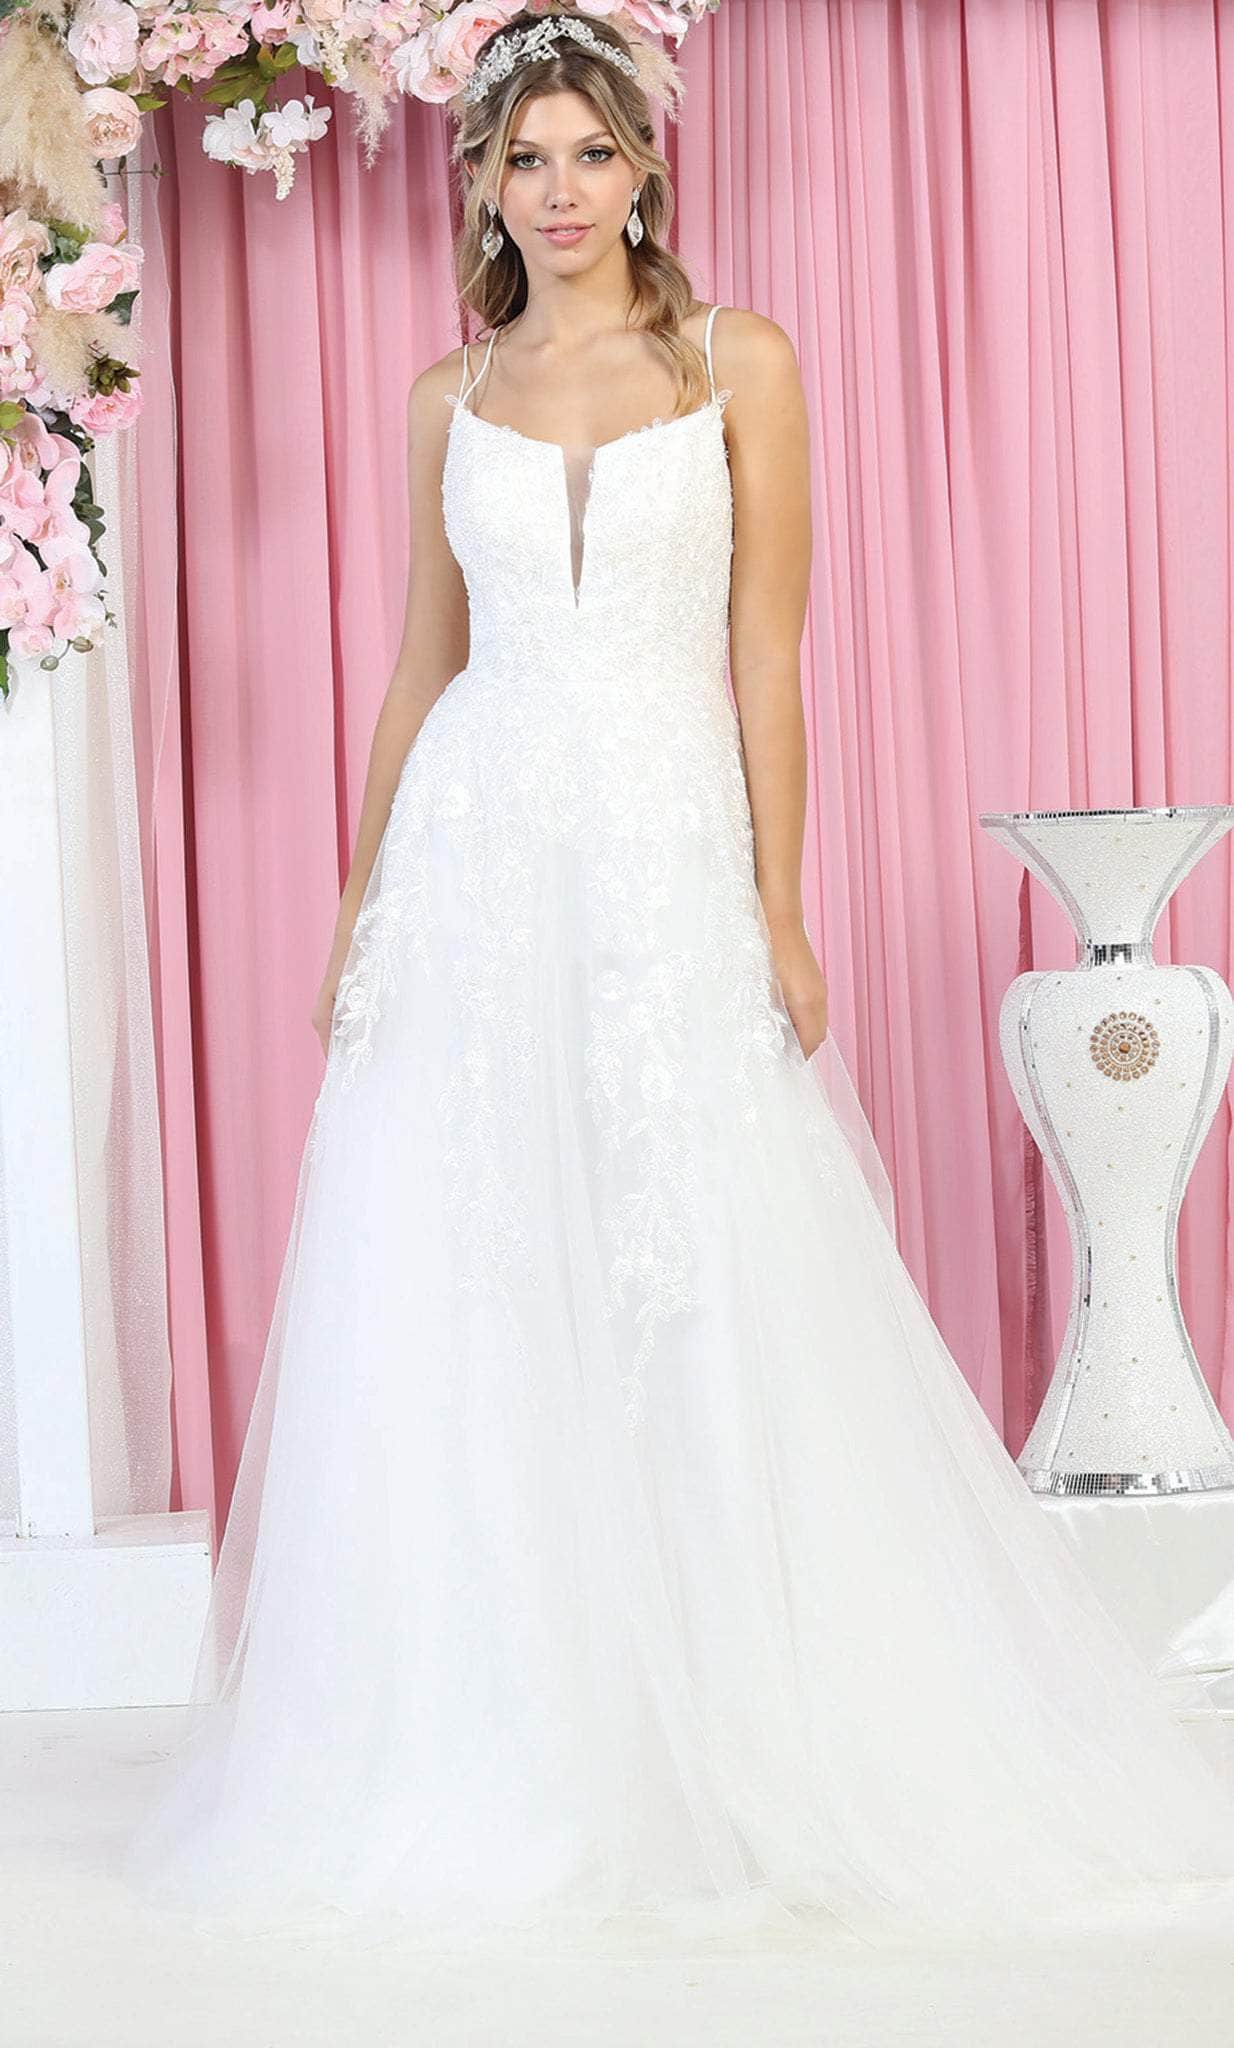 May Queen RQ7917 - Dual Strap A-Line Wedding Gown
